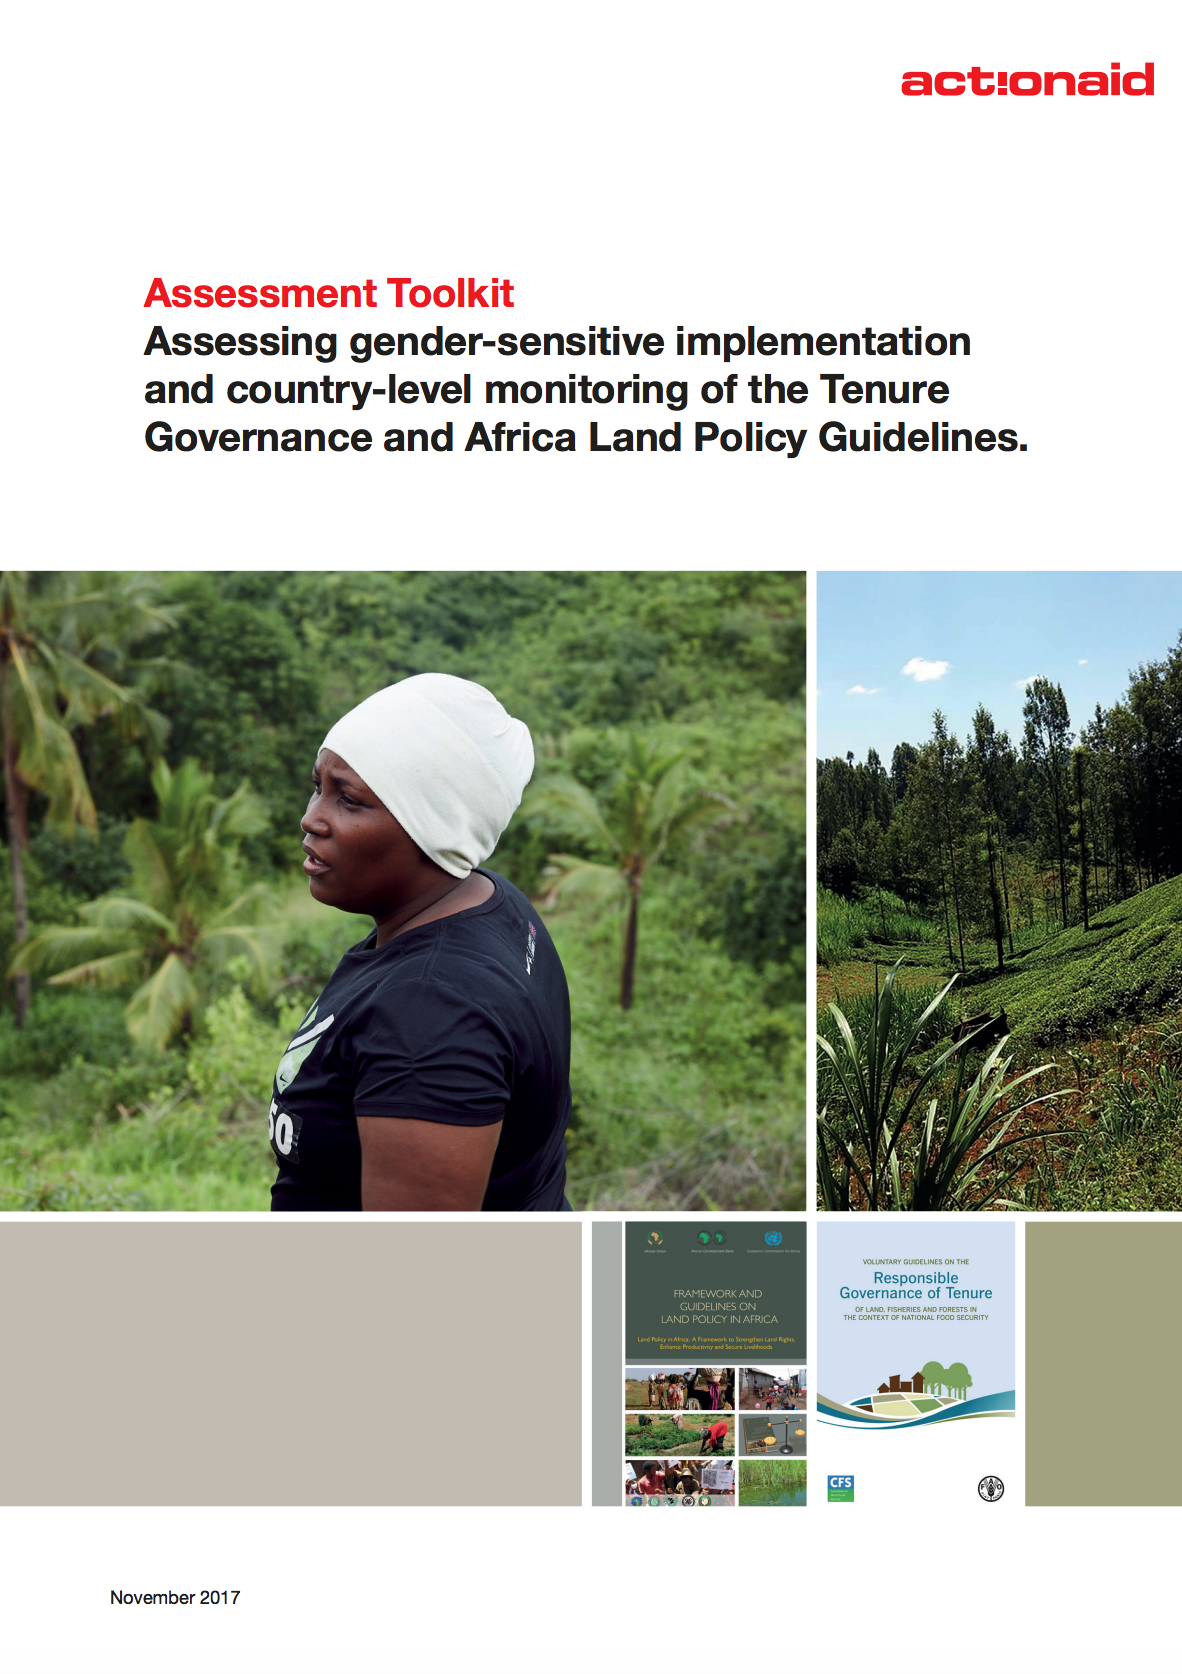 Assessment Toolkit: Assessing gender-sensitive implementation and country-level monitoring of the Tenure Governance and Africa Land Policy Guidelines cover image